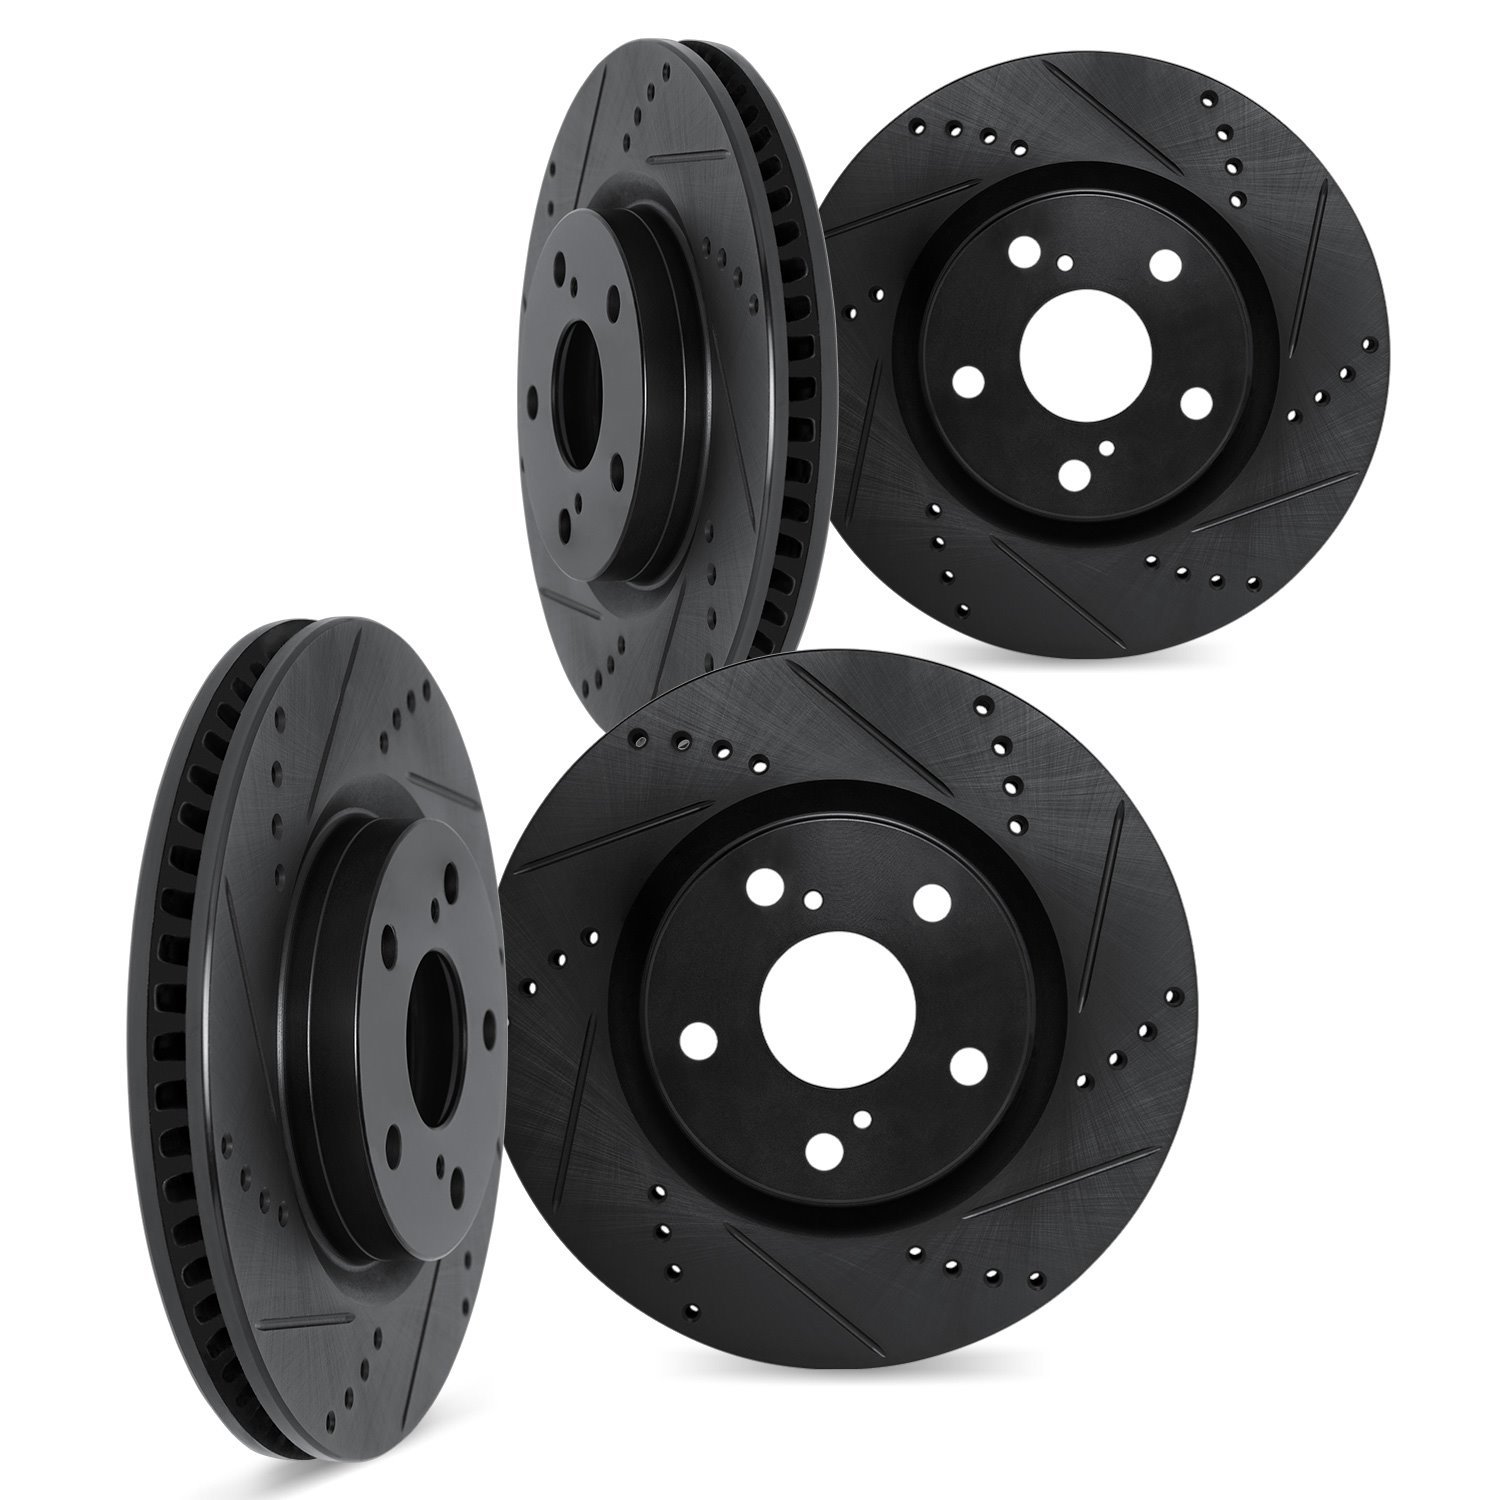 8004-67112 Drilled/Slotted Brake Rotors [Black], 2014-2019 Infiniti/Nissan, Position: Front and Rear